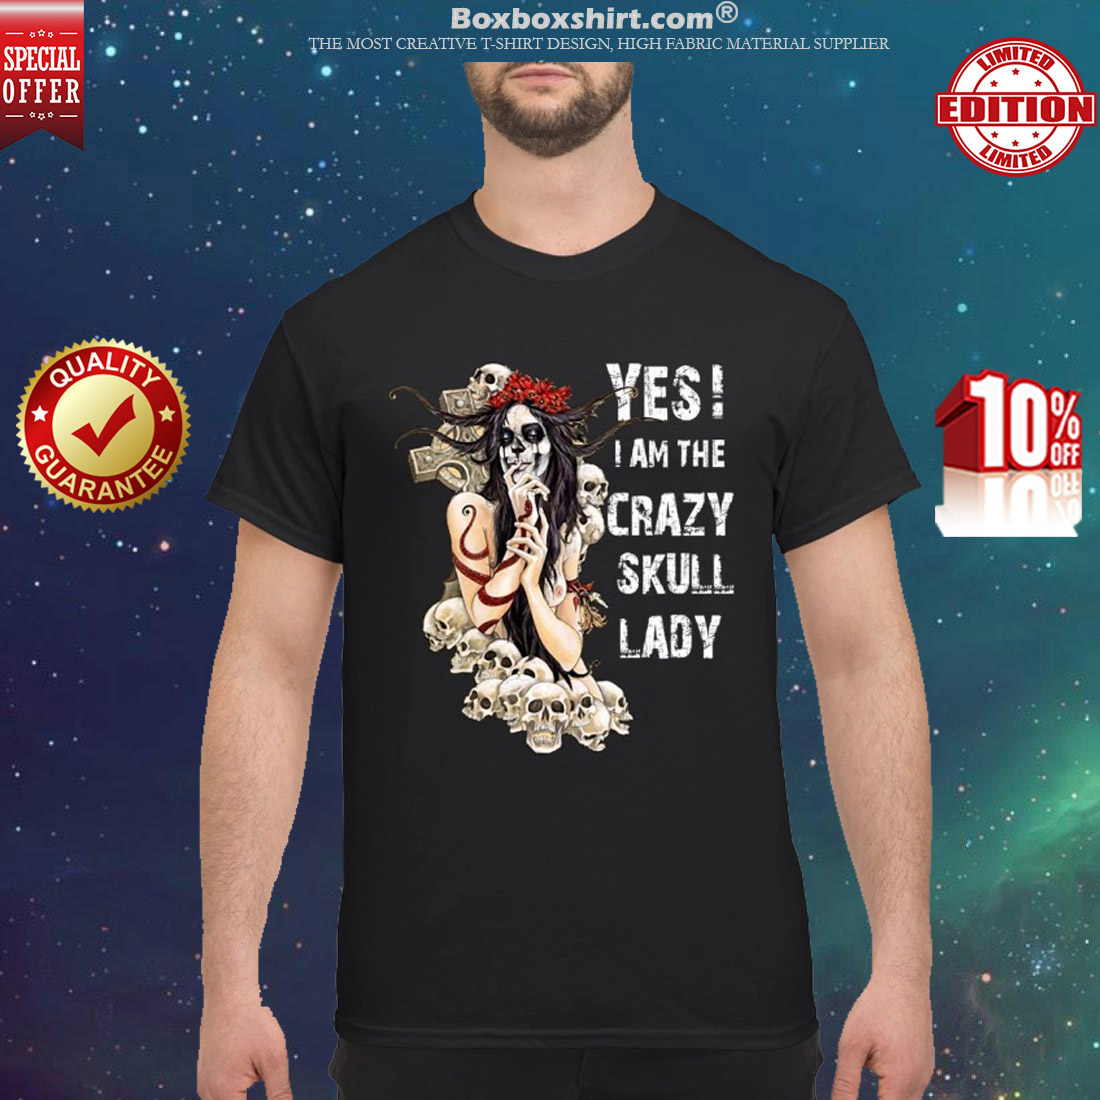 Yes I am the crazy skull lady classic shirt